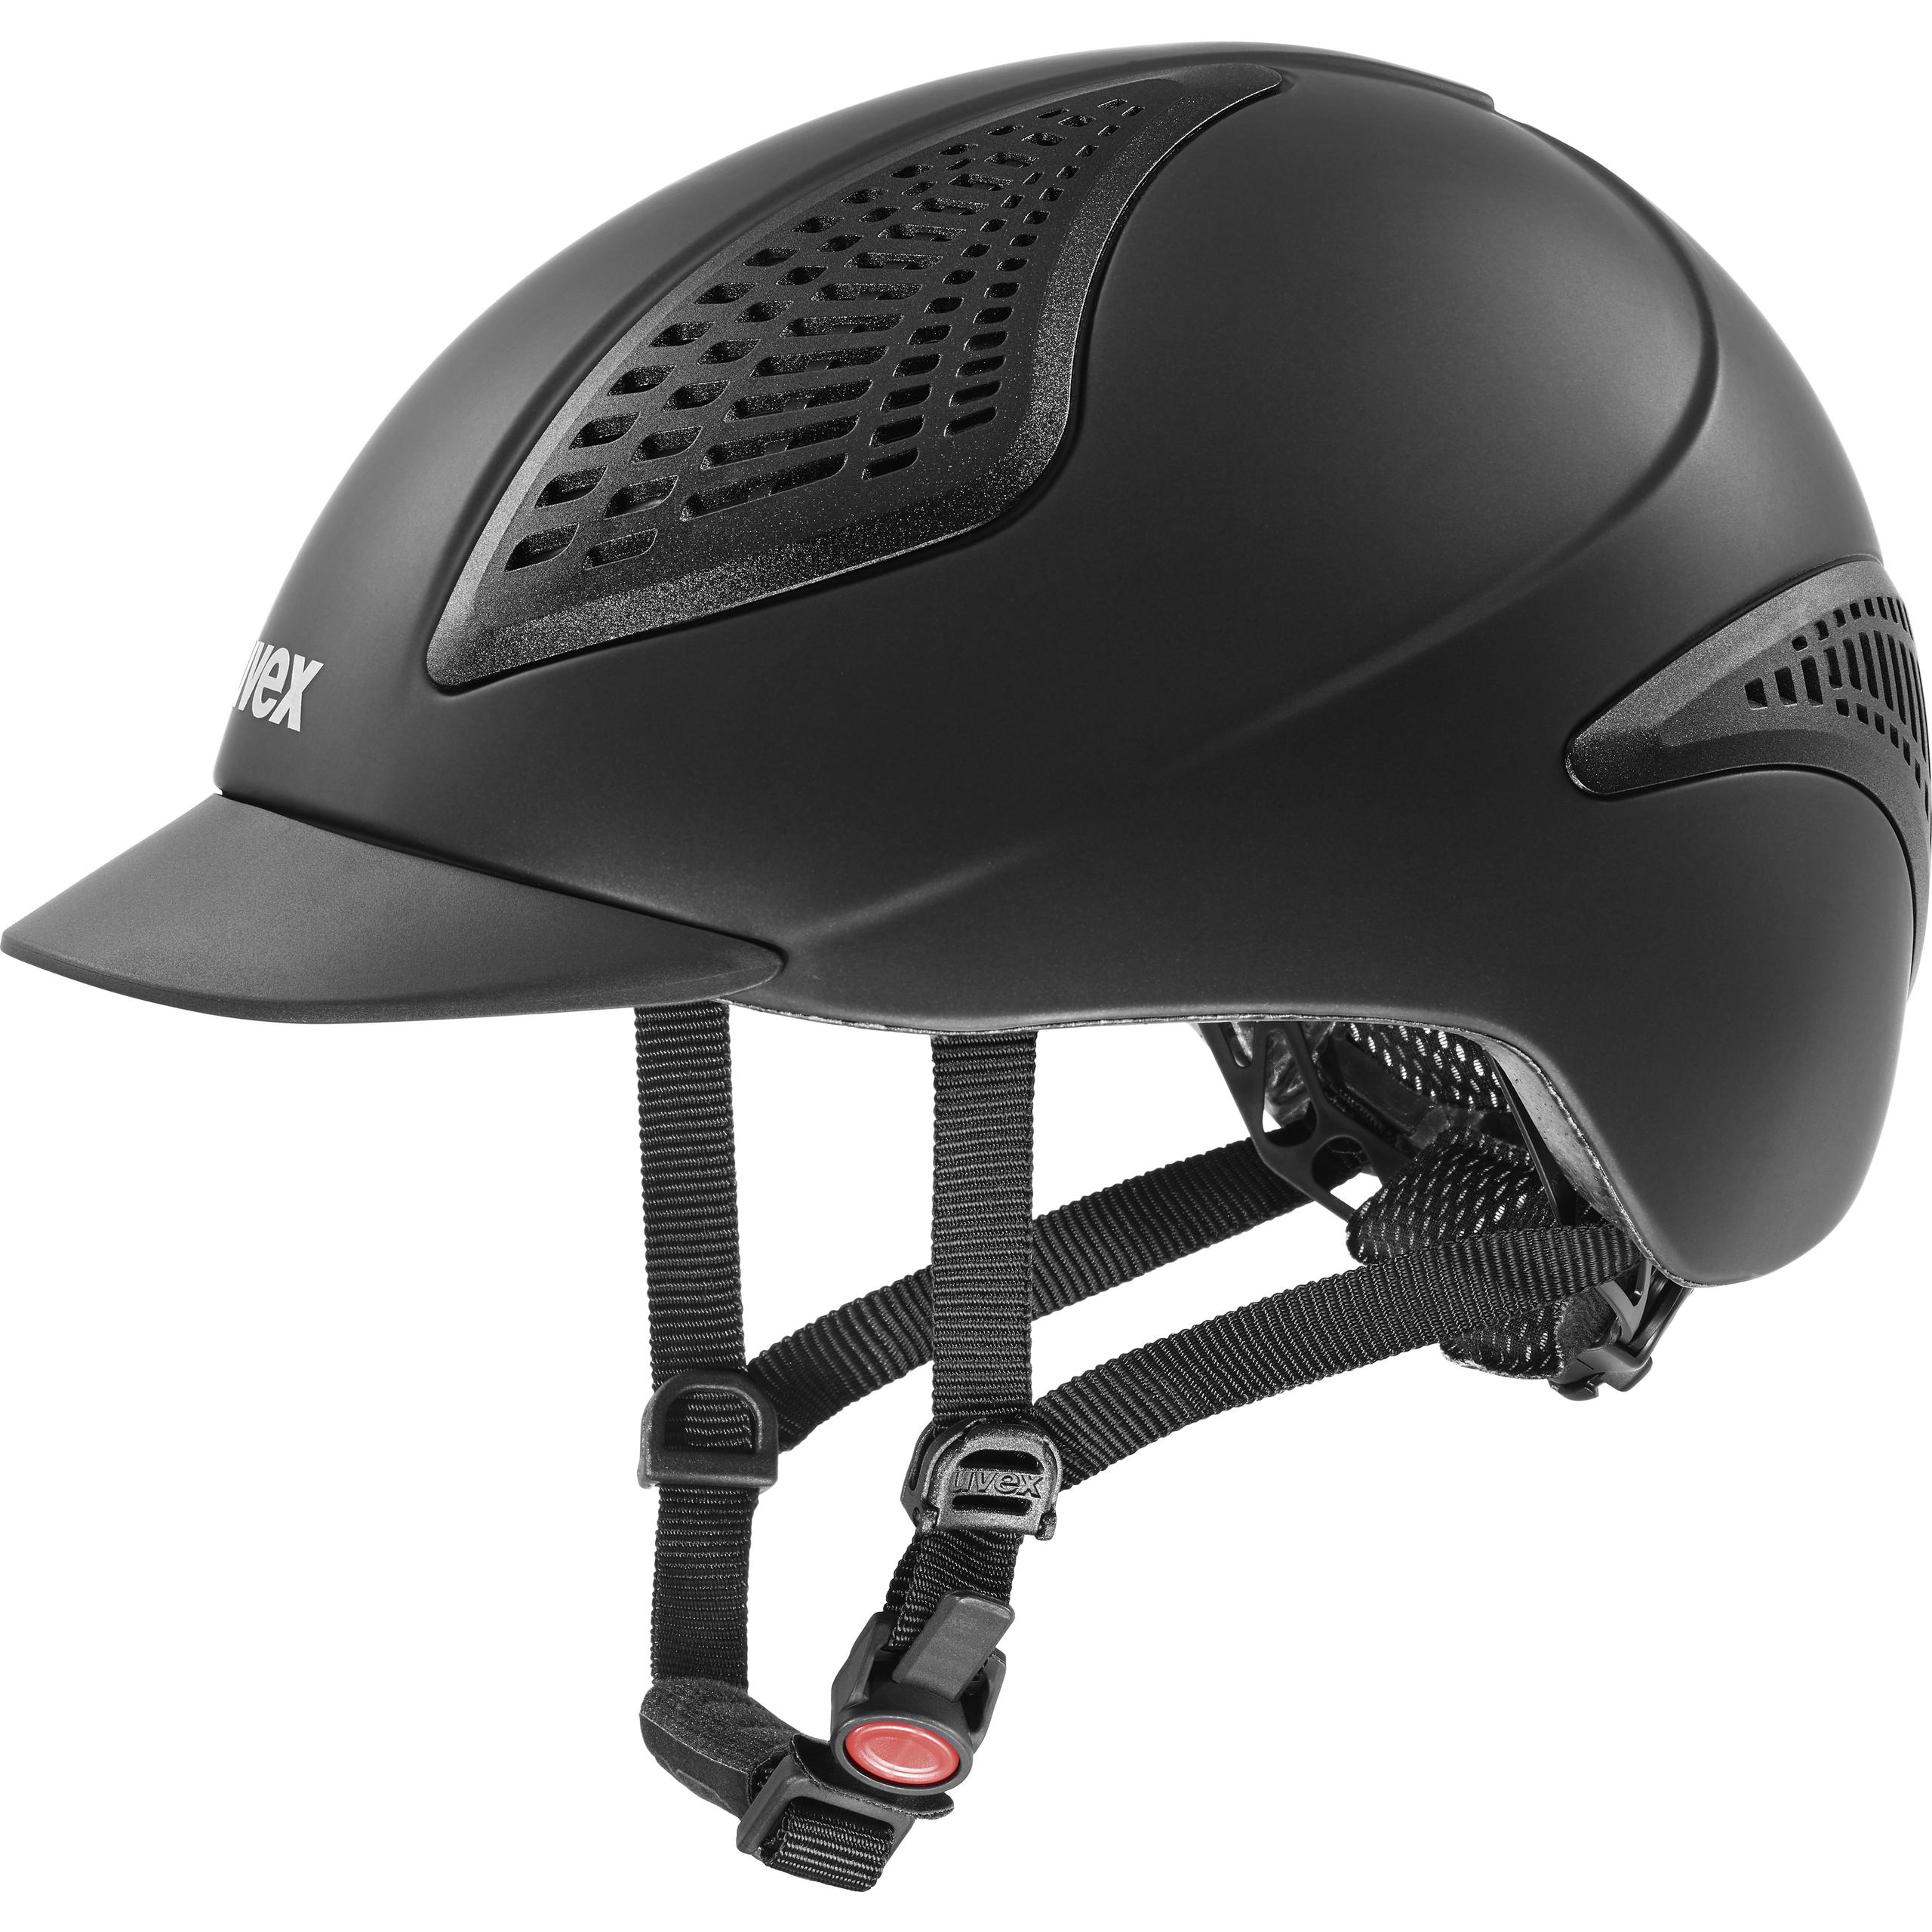 UVEX EXXENTIAL II BLACK MAT RIDING HELMET Lightweight and breathable 